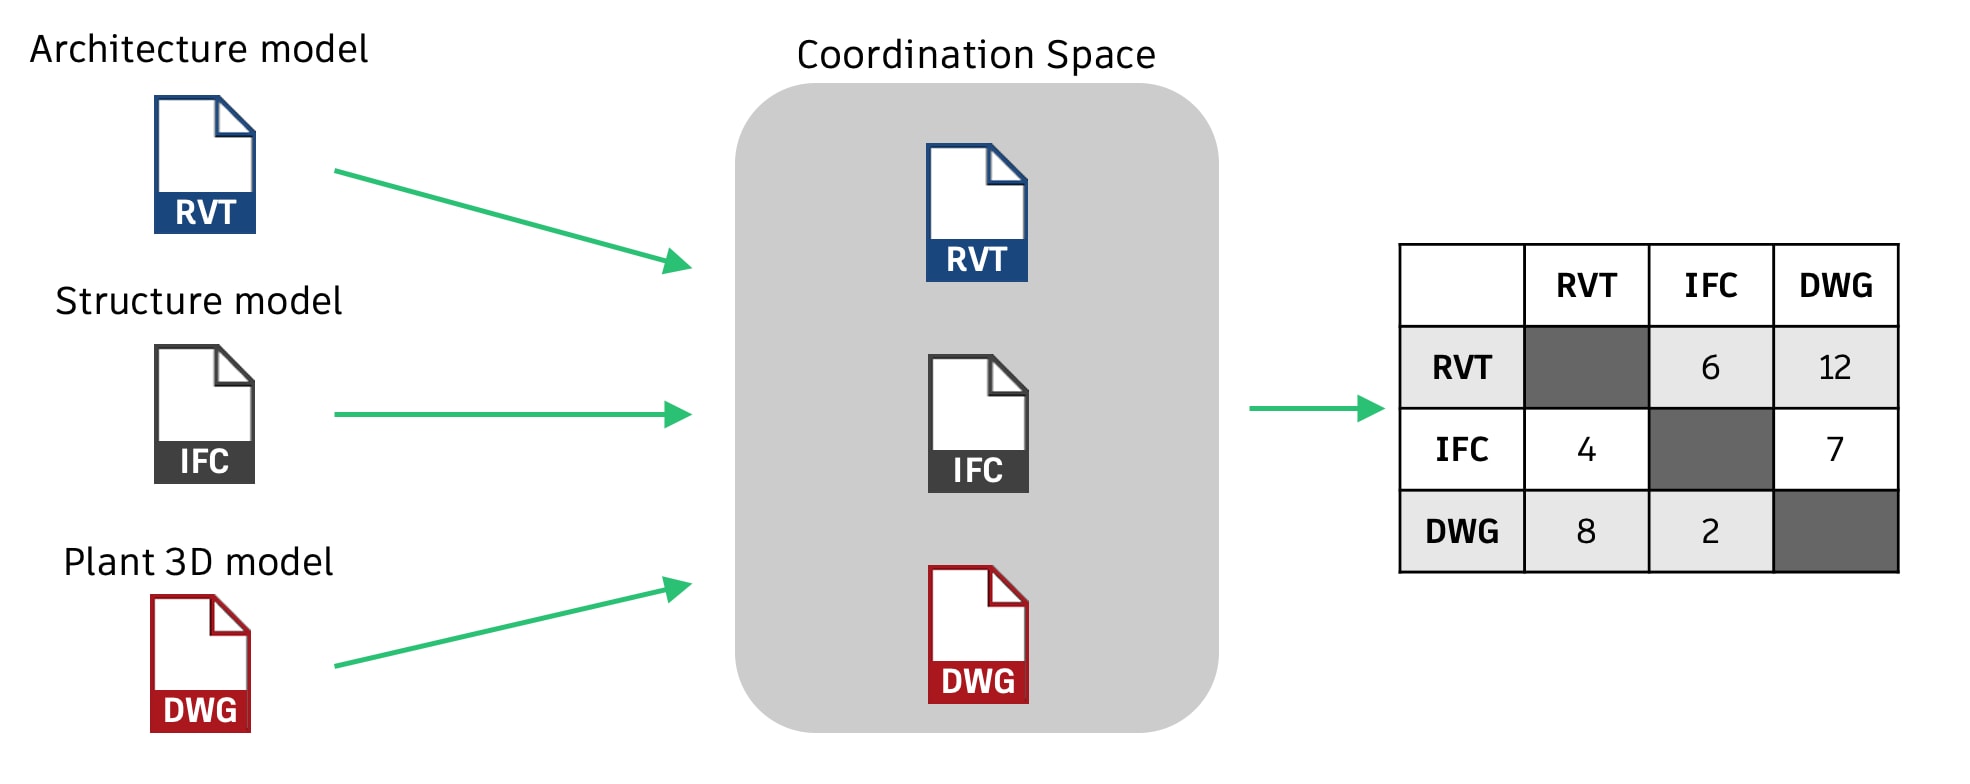 Illustration showing Coordination space and clash matrix